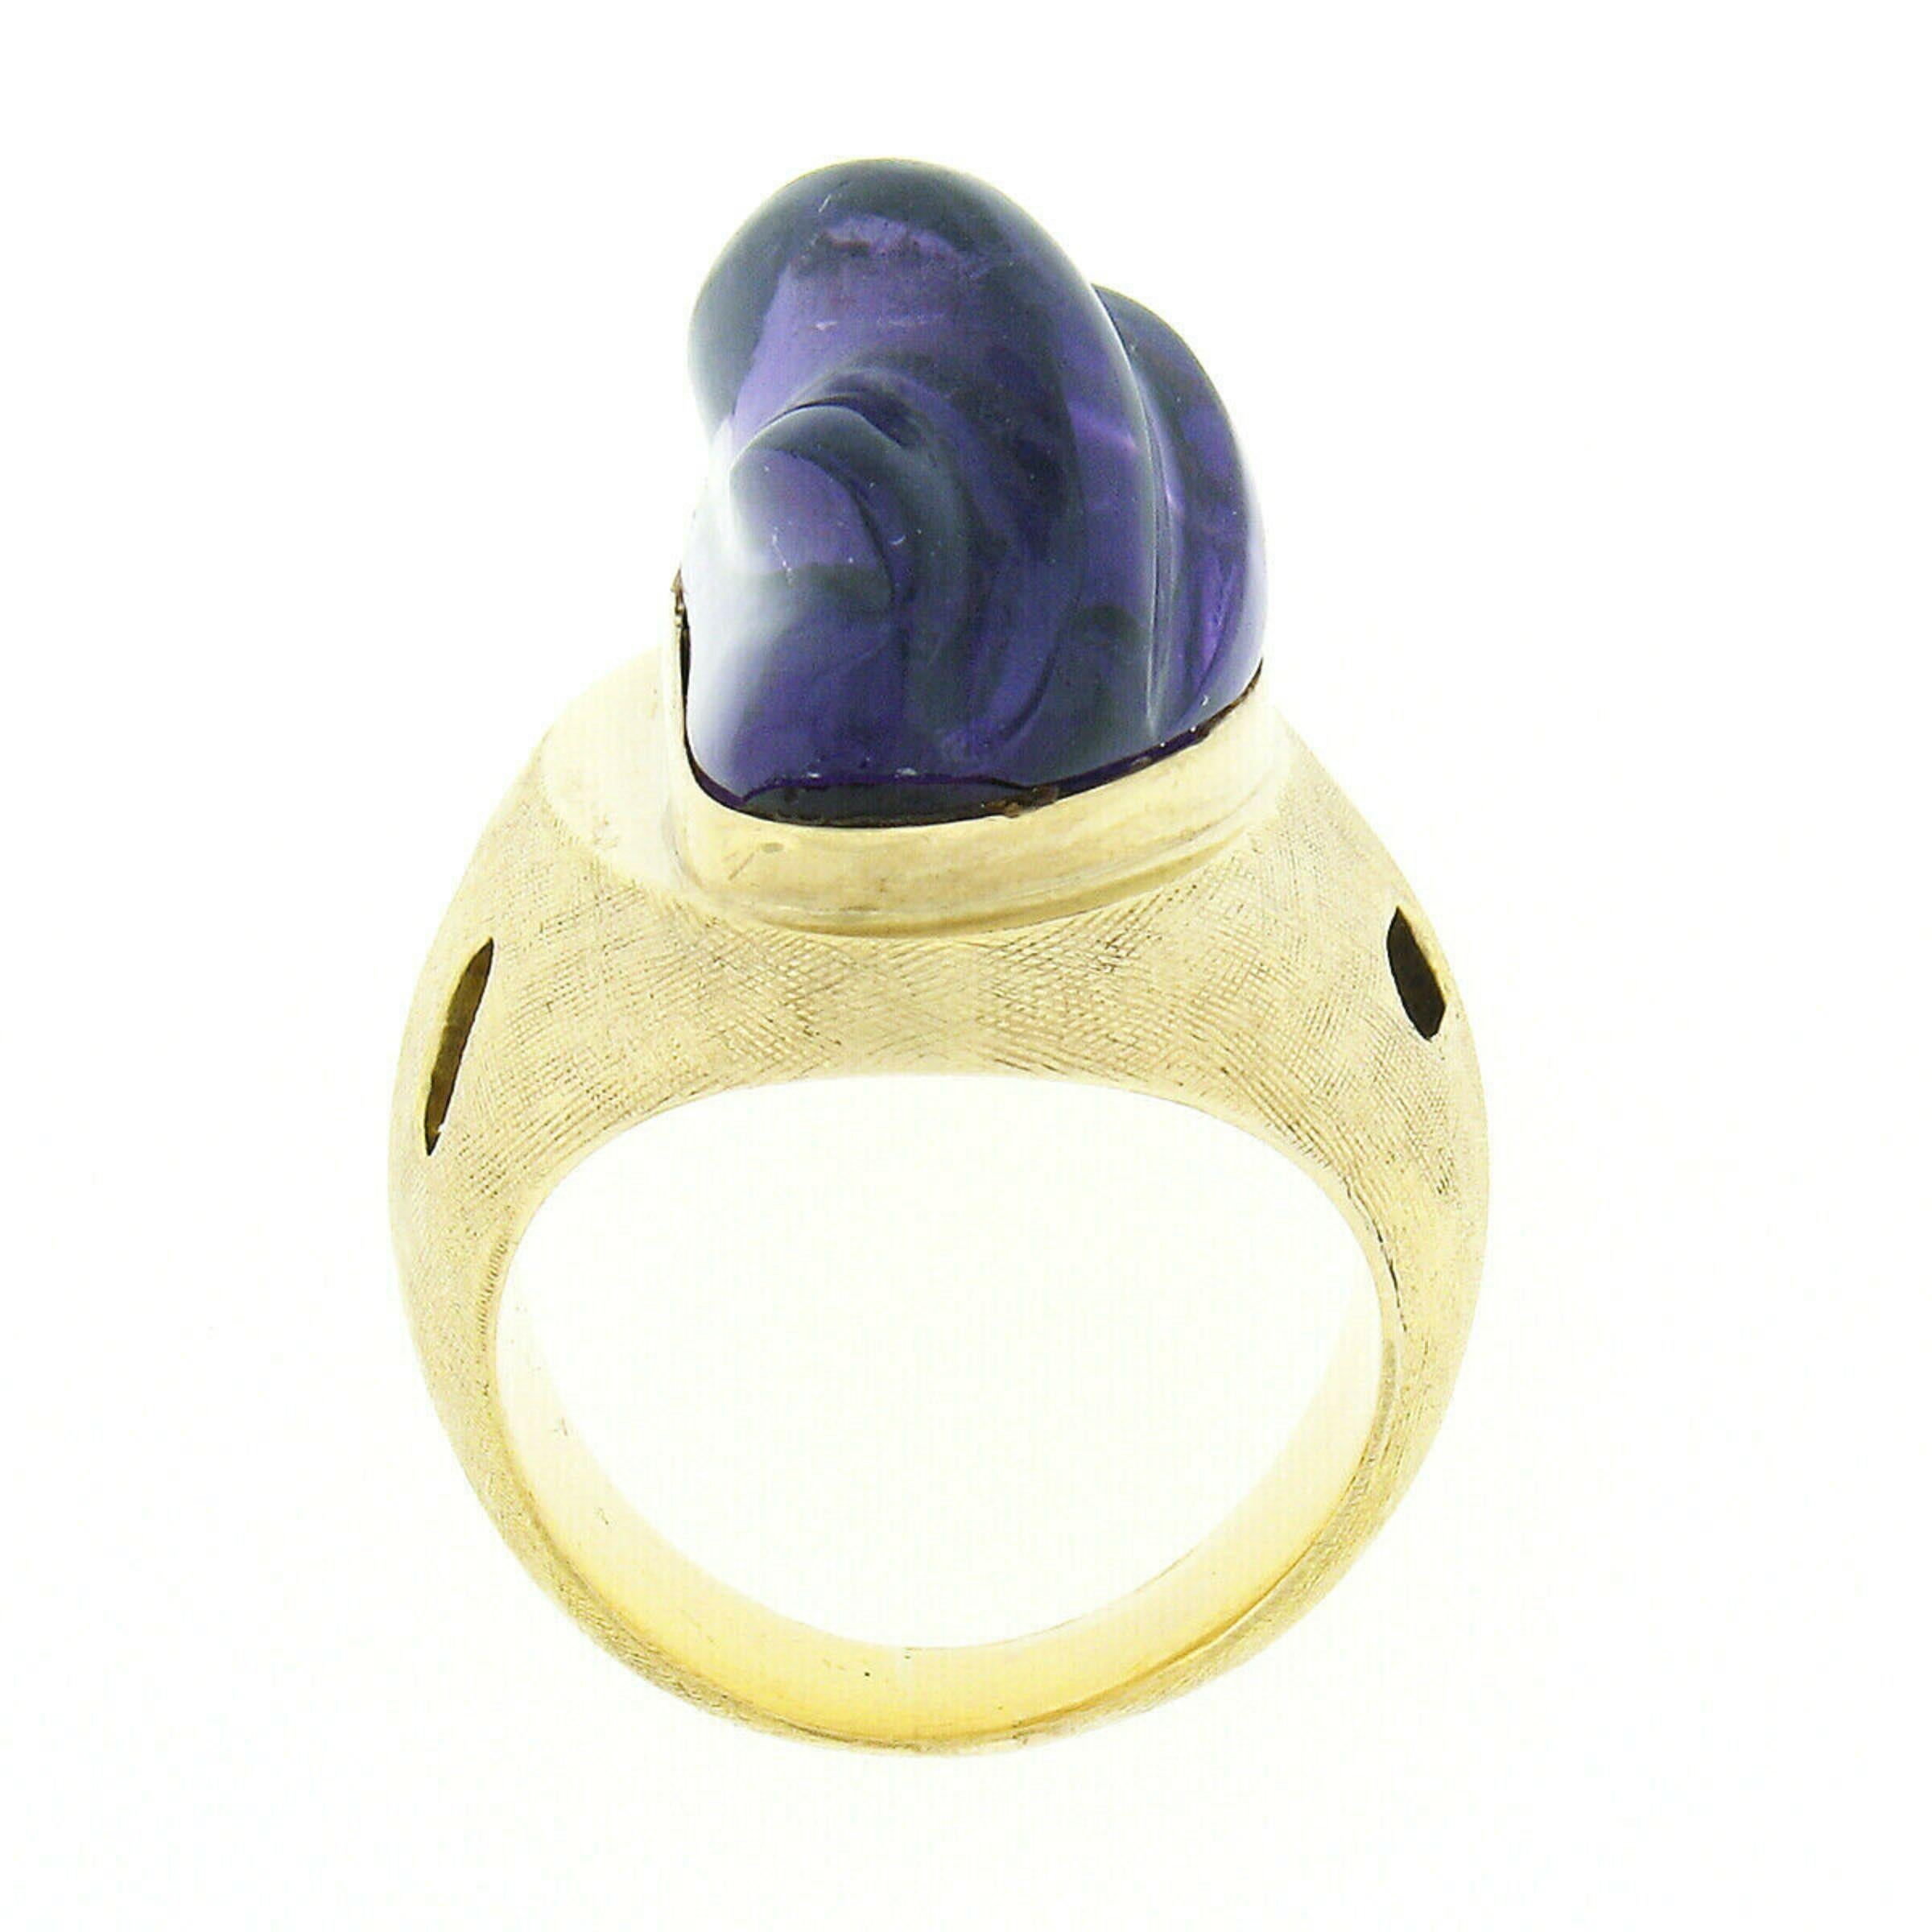 Cabochon Collectible Modernist Burle Marx 18k Gold Carved Amethyst Florentine Finish Ring